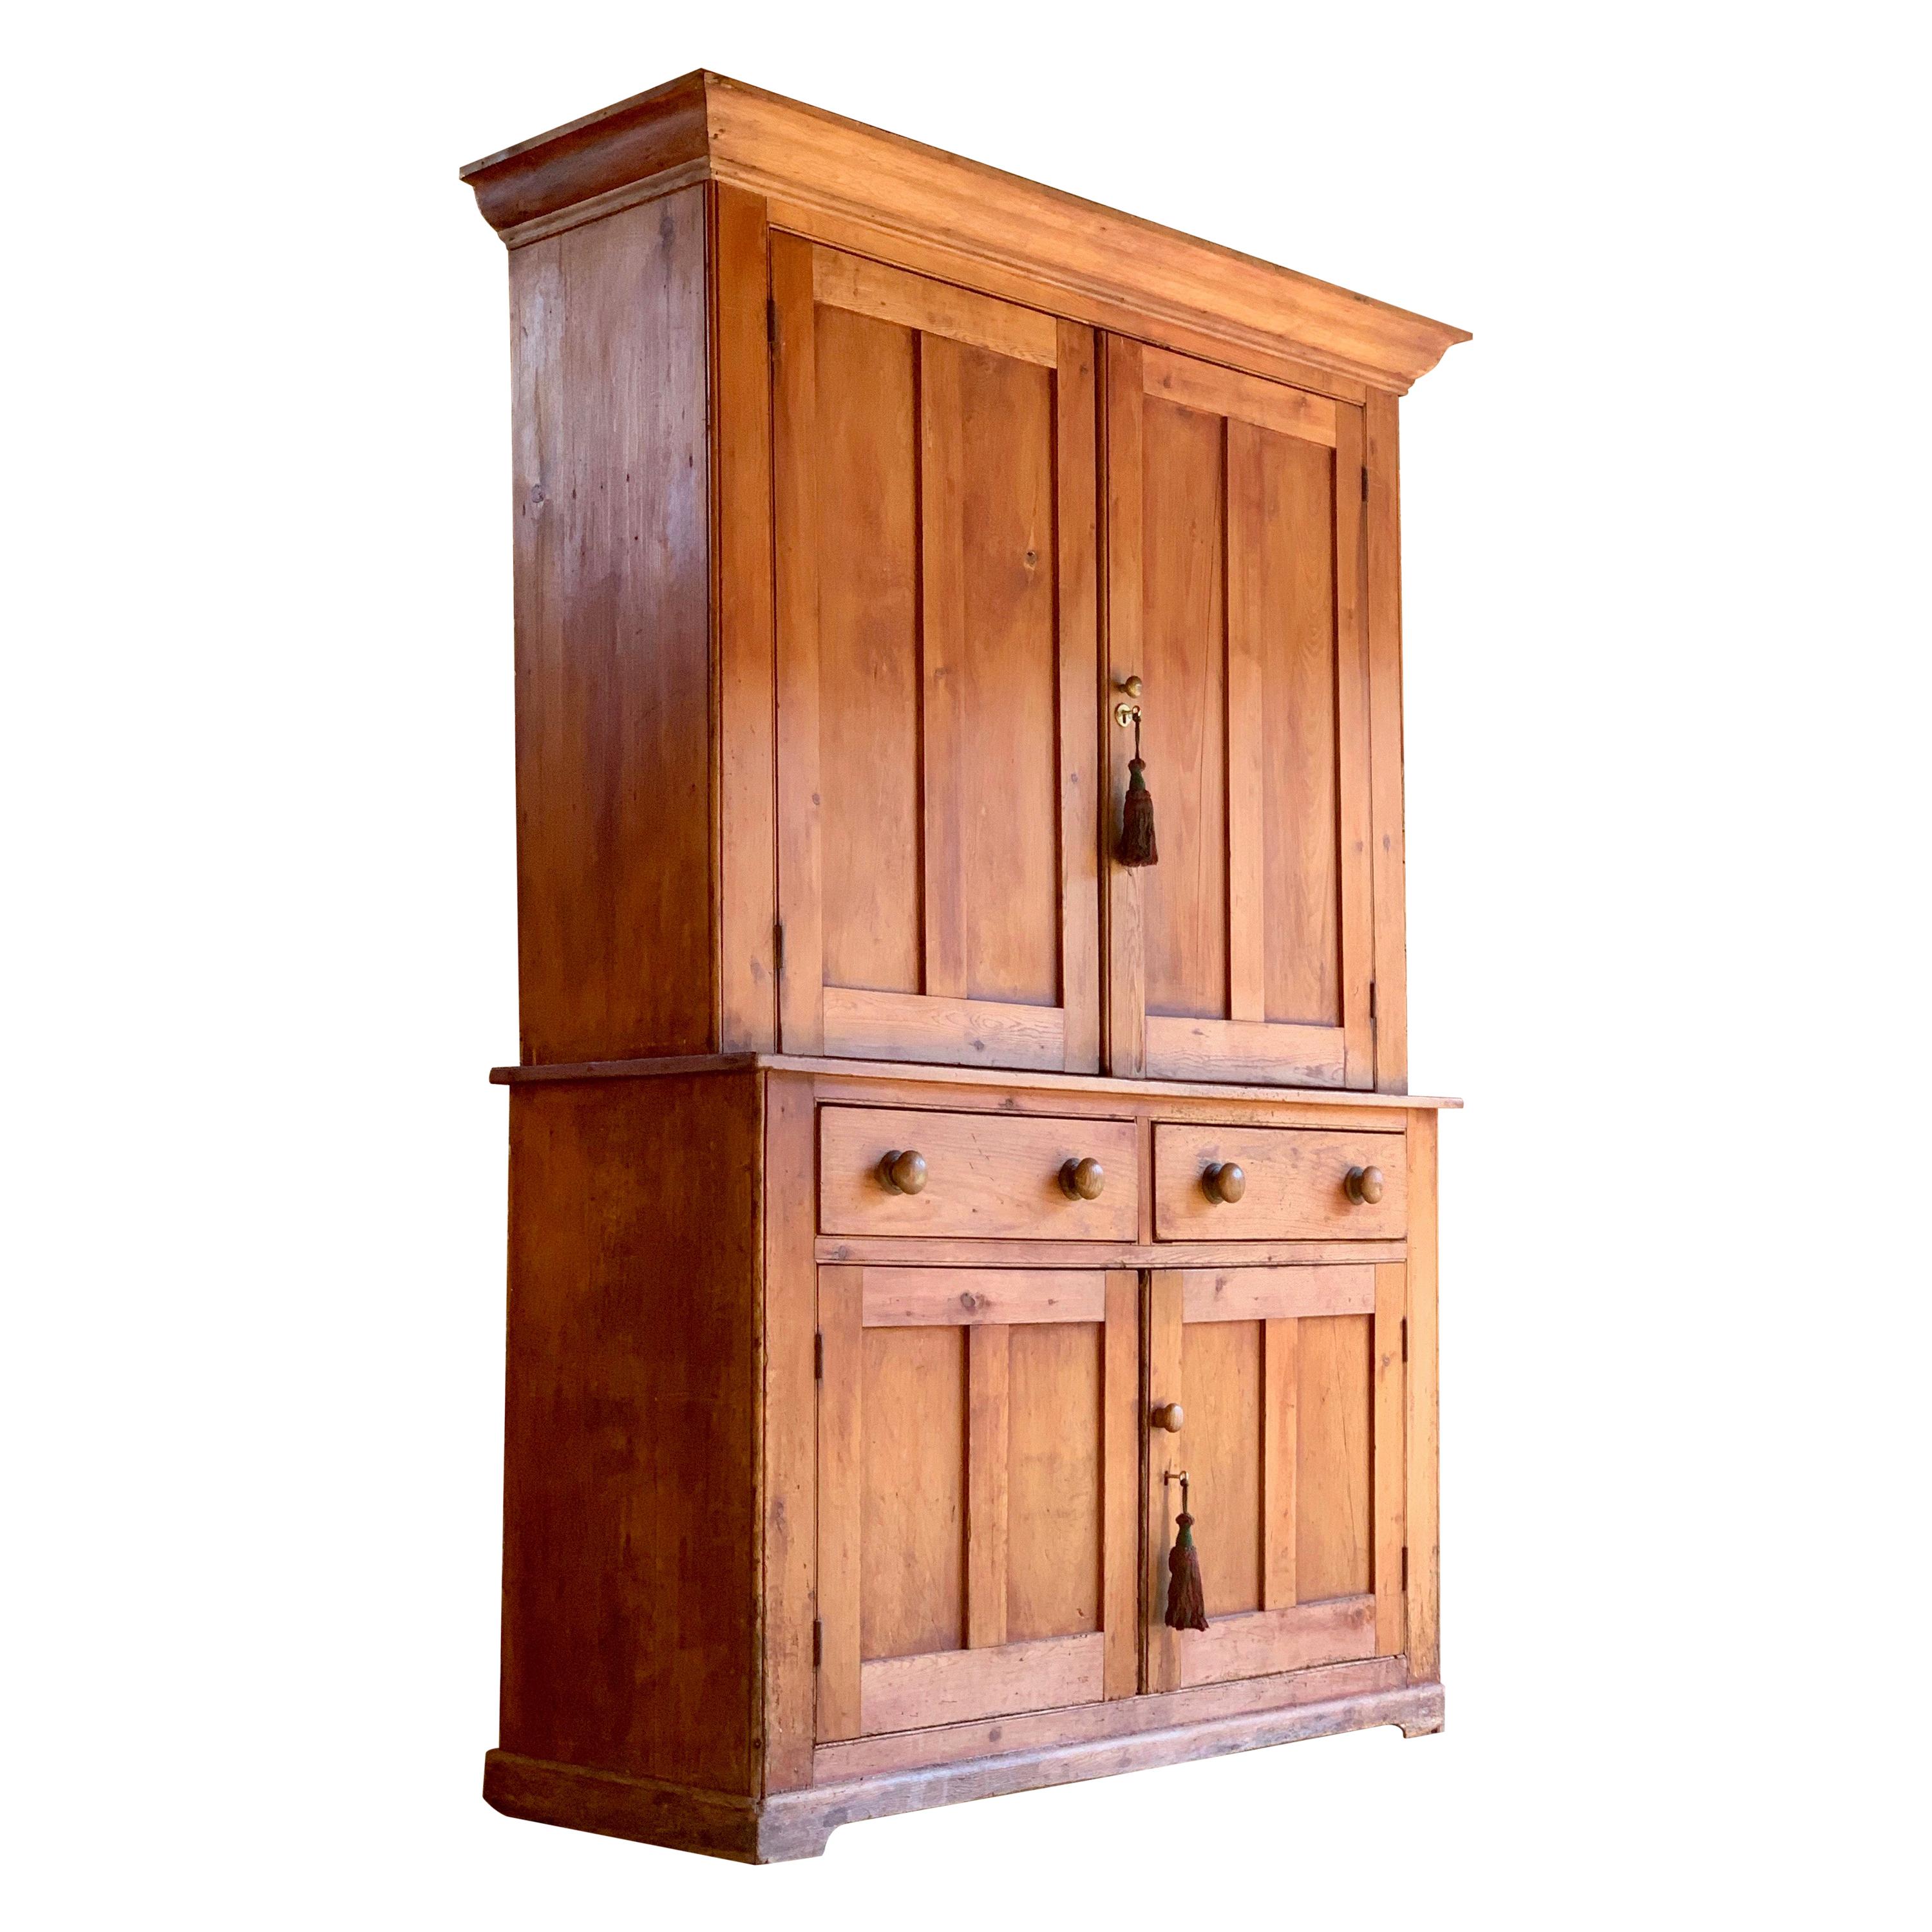 Victorian Pine Housekeepers Cupboard Pantry Antique 19th Century, circa 1895